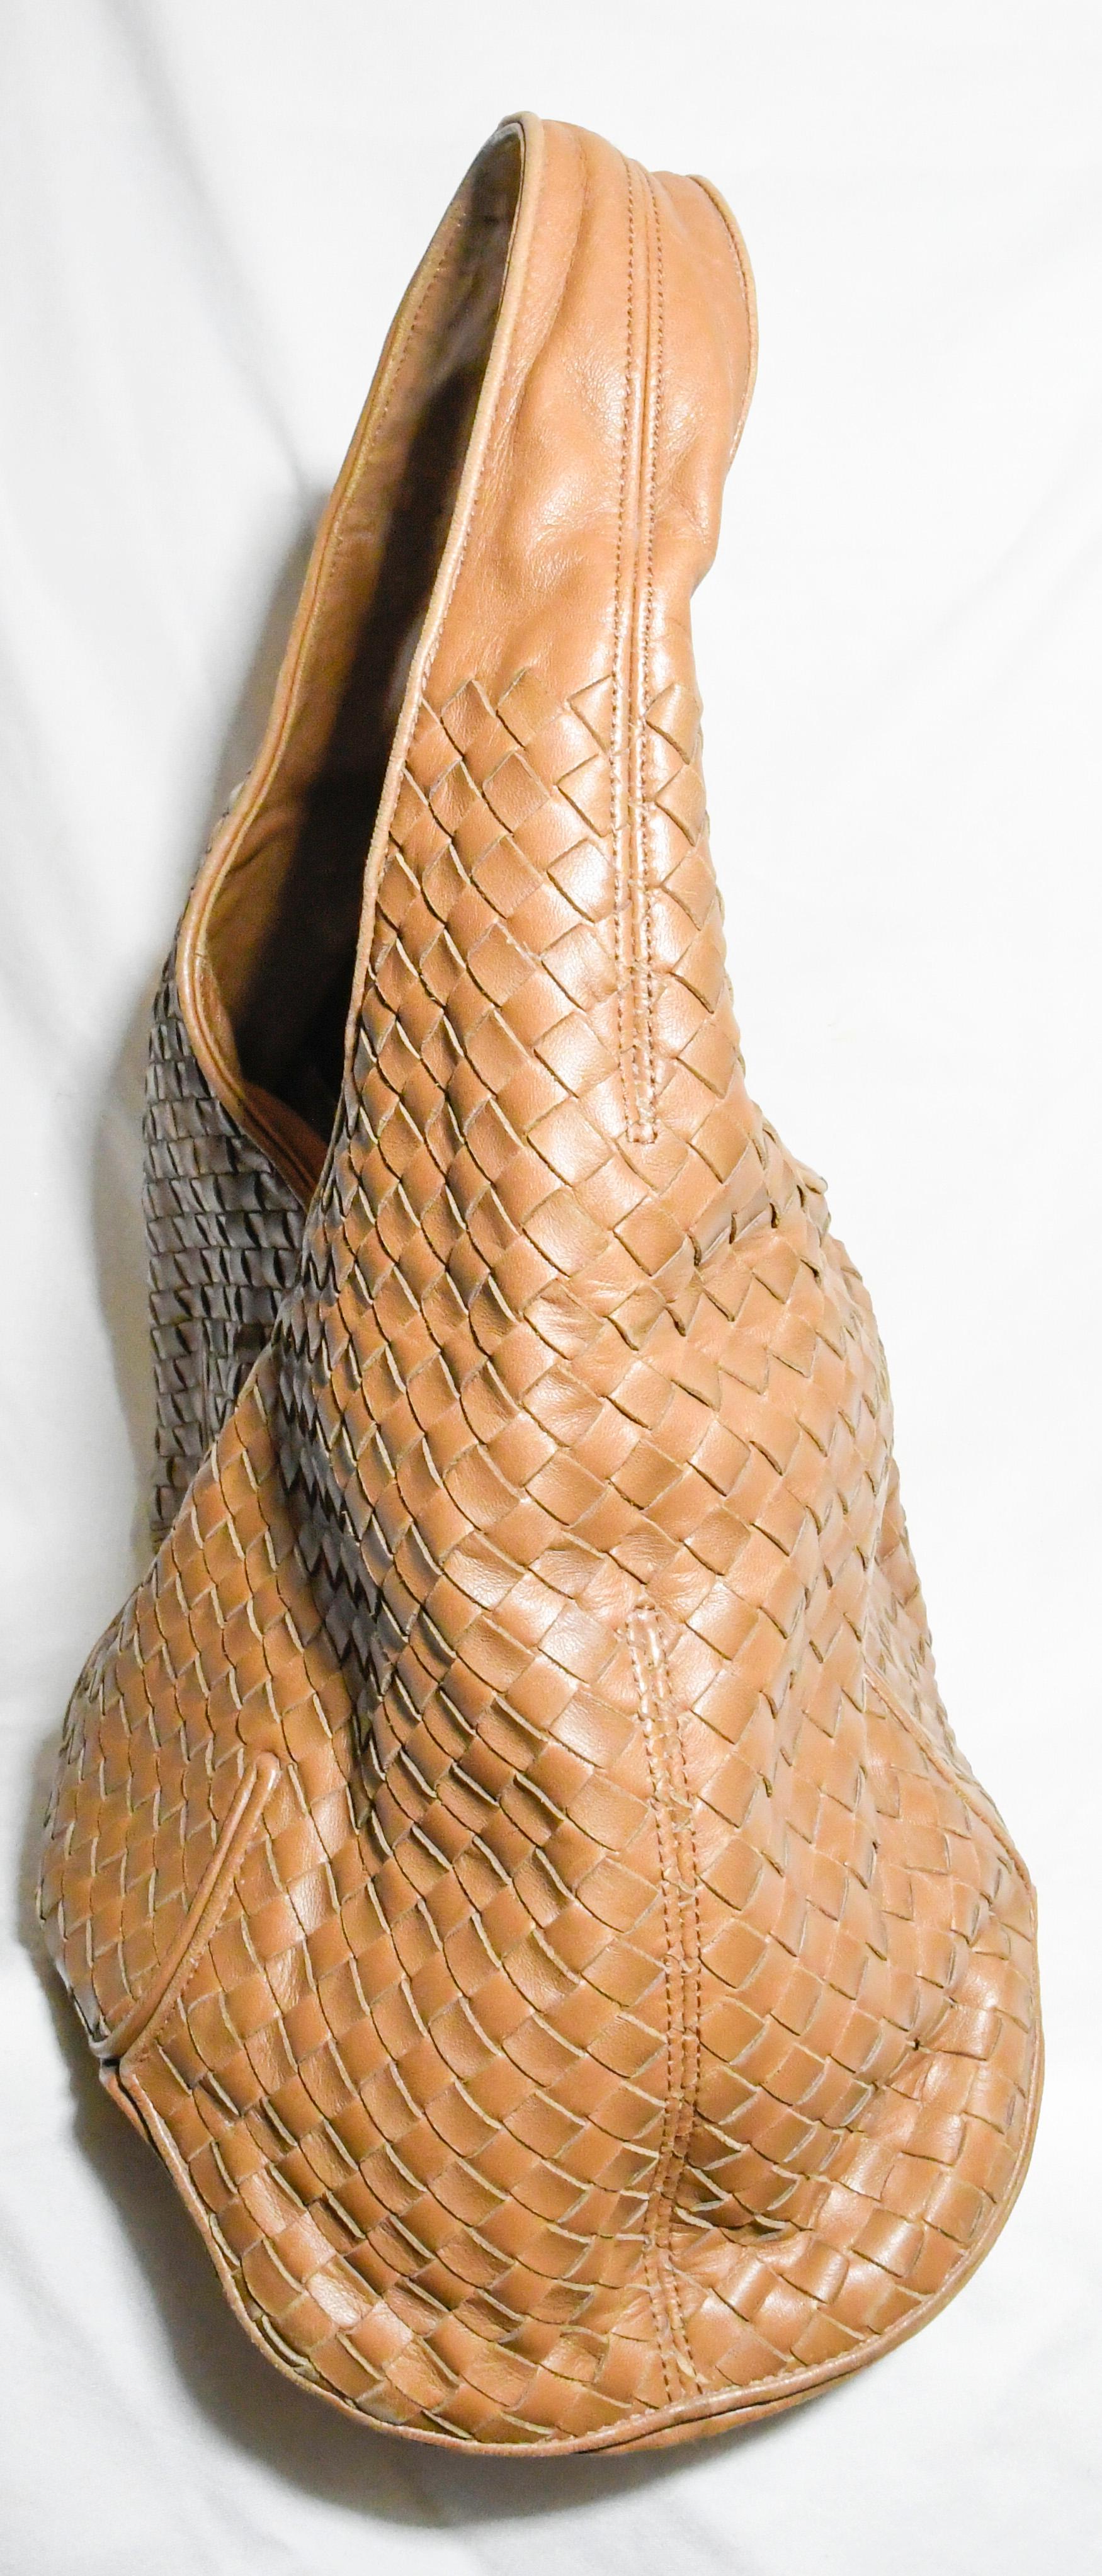 Bottega Veneta tan leather hobo bag features a woven (intrecciato) leather body.  This single flat shoulder strap bag includes a top zipper closure that opens to a light blue suede interior with a zipper side pocket.
This bag is in very good